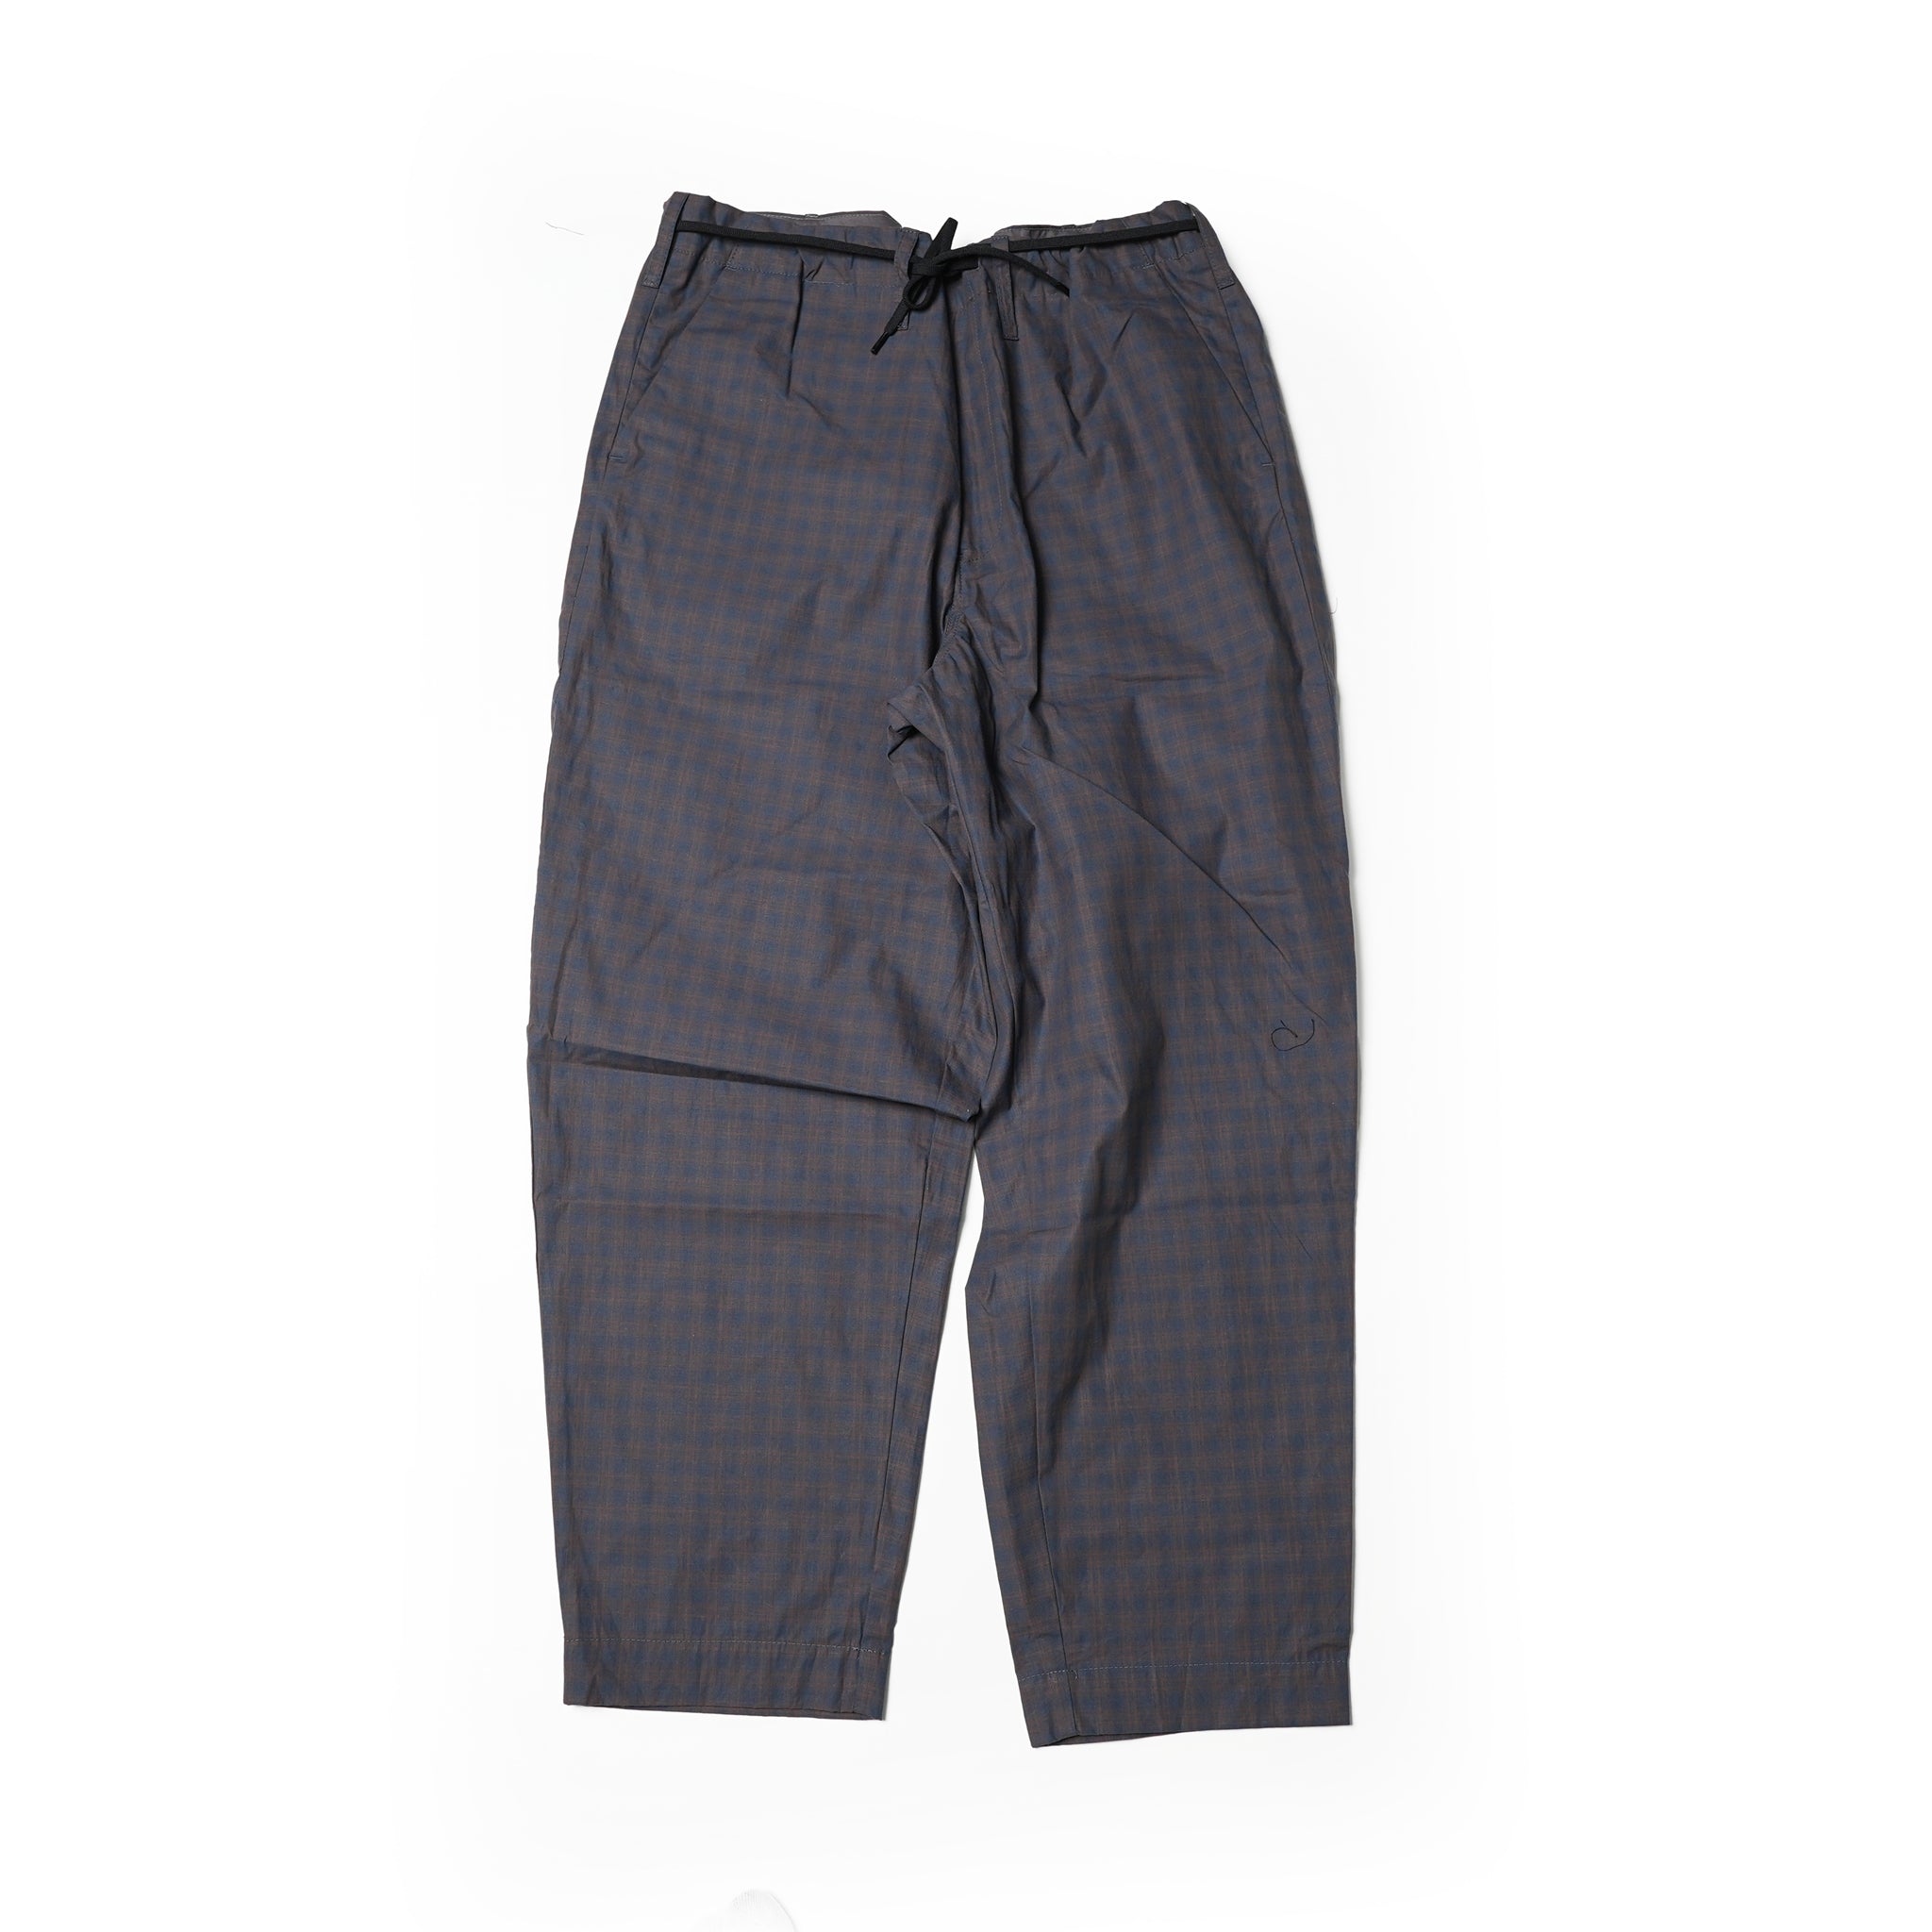 Name: Non-Elastic E-Z Pants Dead Stock Fabric Collection | Color:Navy Plaid | Size: One Fits All 【CITYLIGHTS PRODUCTS_シティライツプロダクツ】